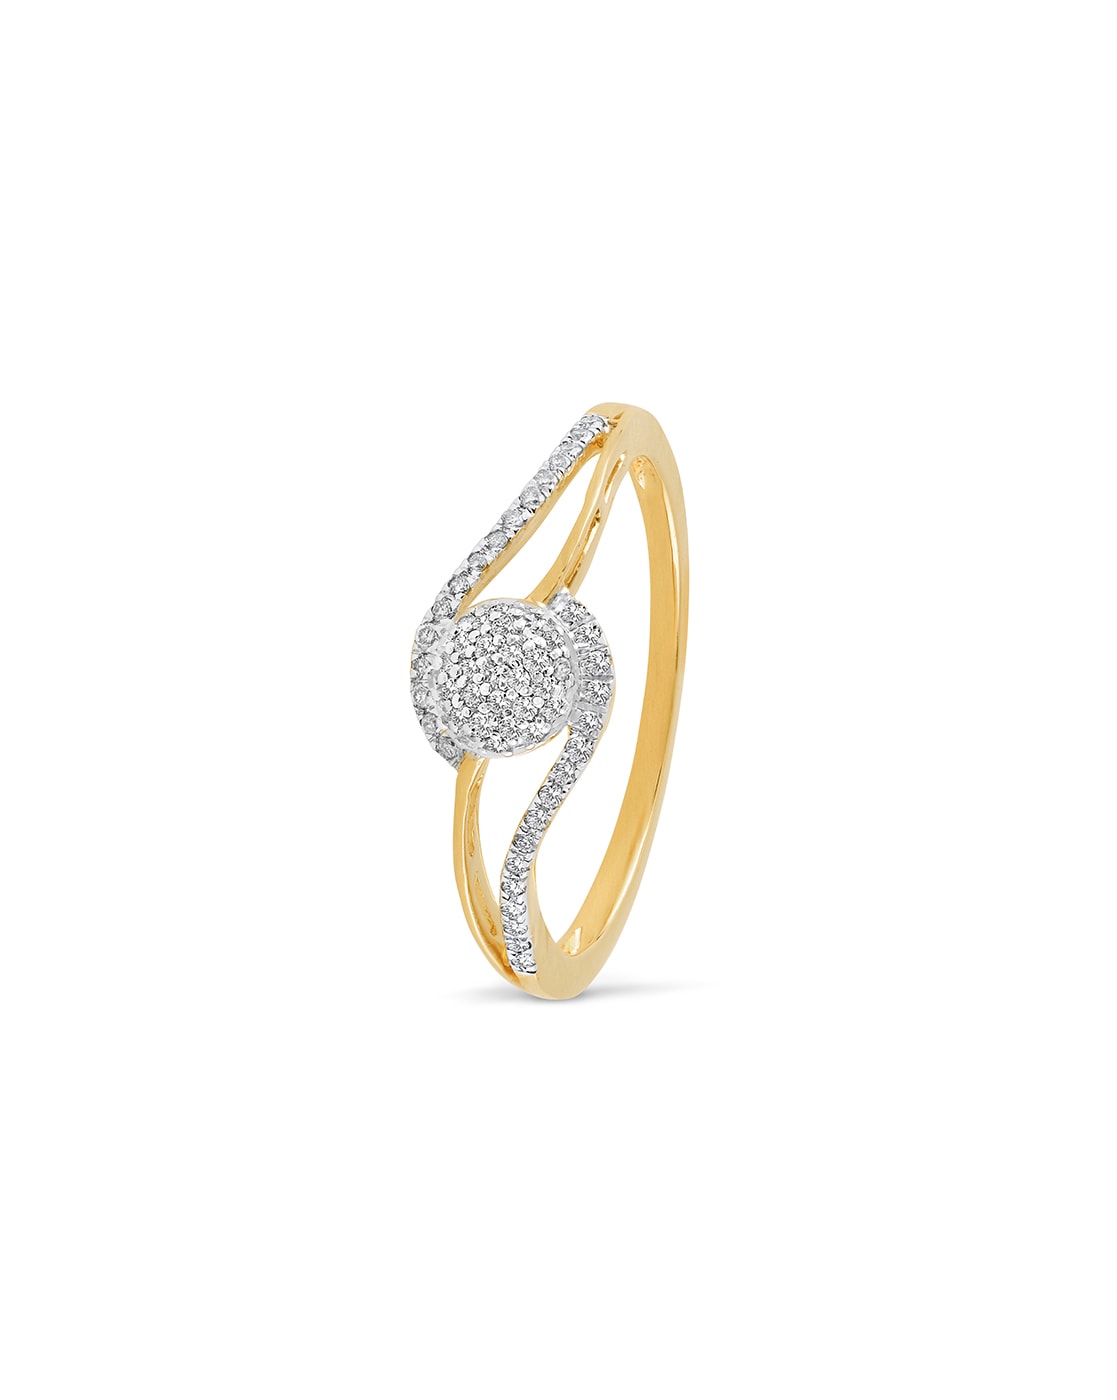 Reliance Jewels unveils its new Valentine's day collection - 'Eternity' |  Headlines